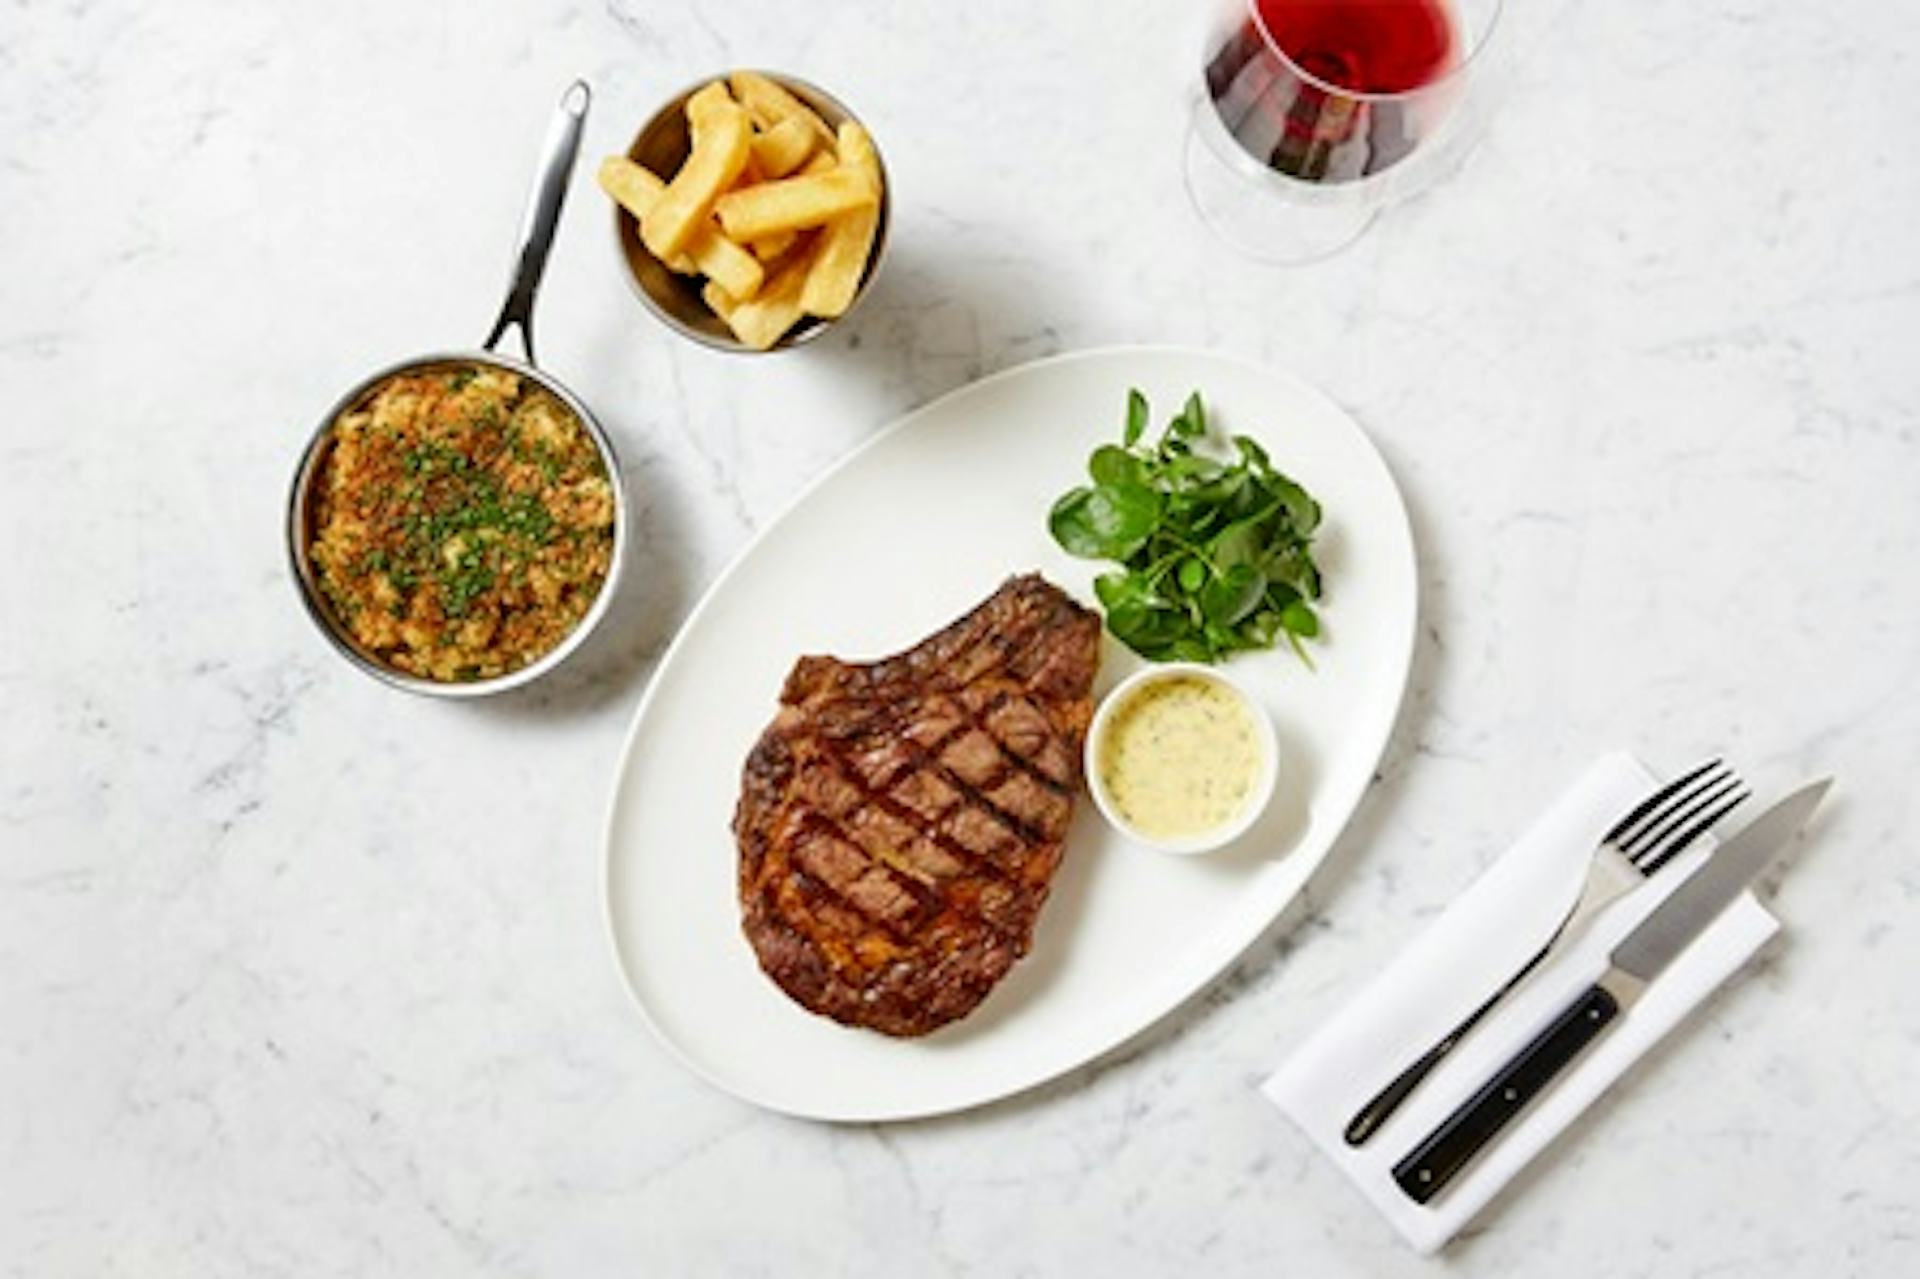 Three Course Lunch with Champagne for Two at The Grill at Harrods